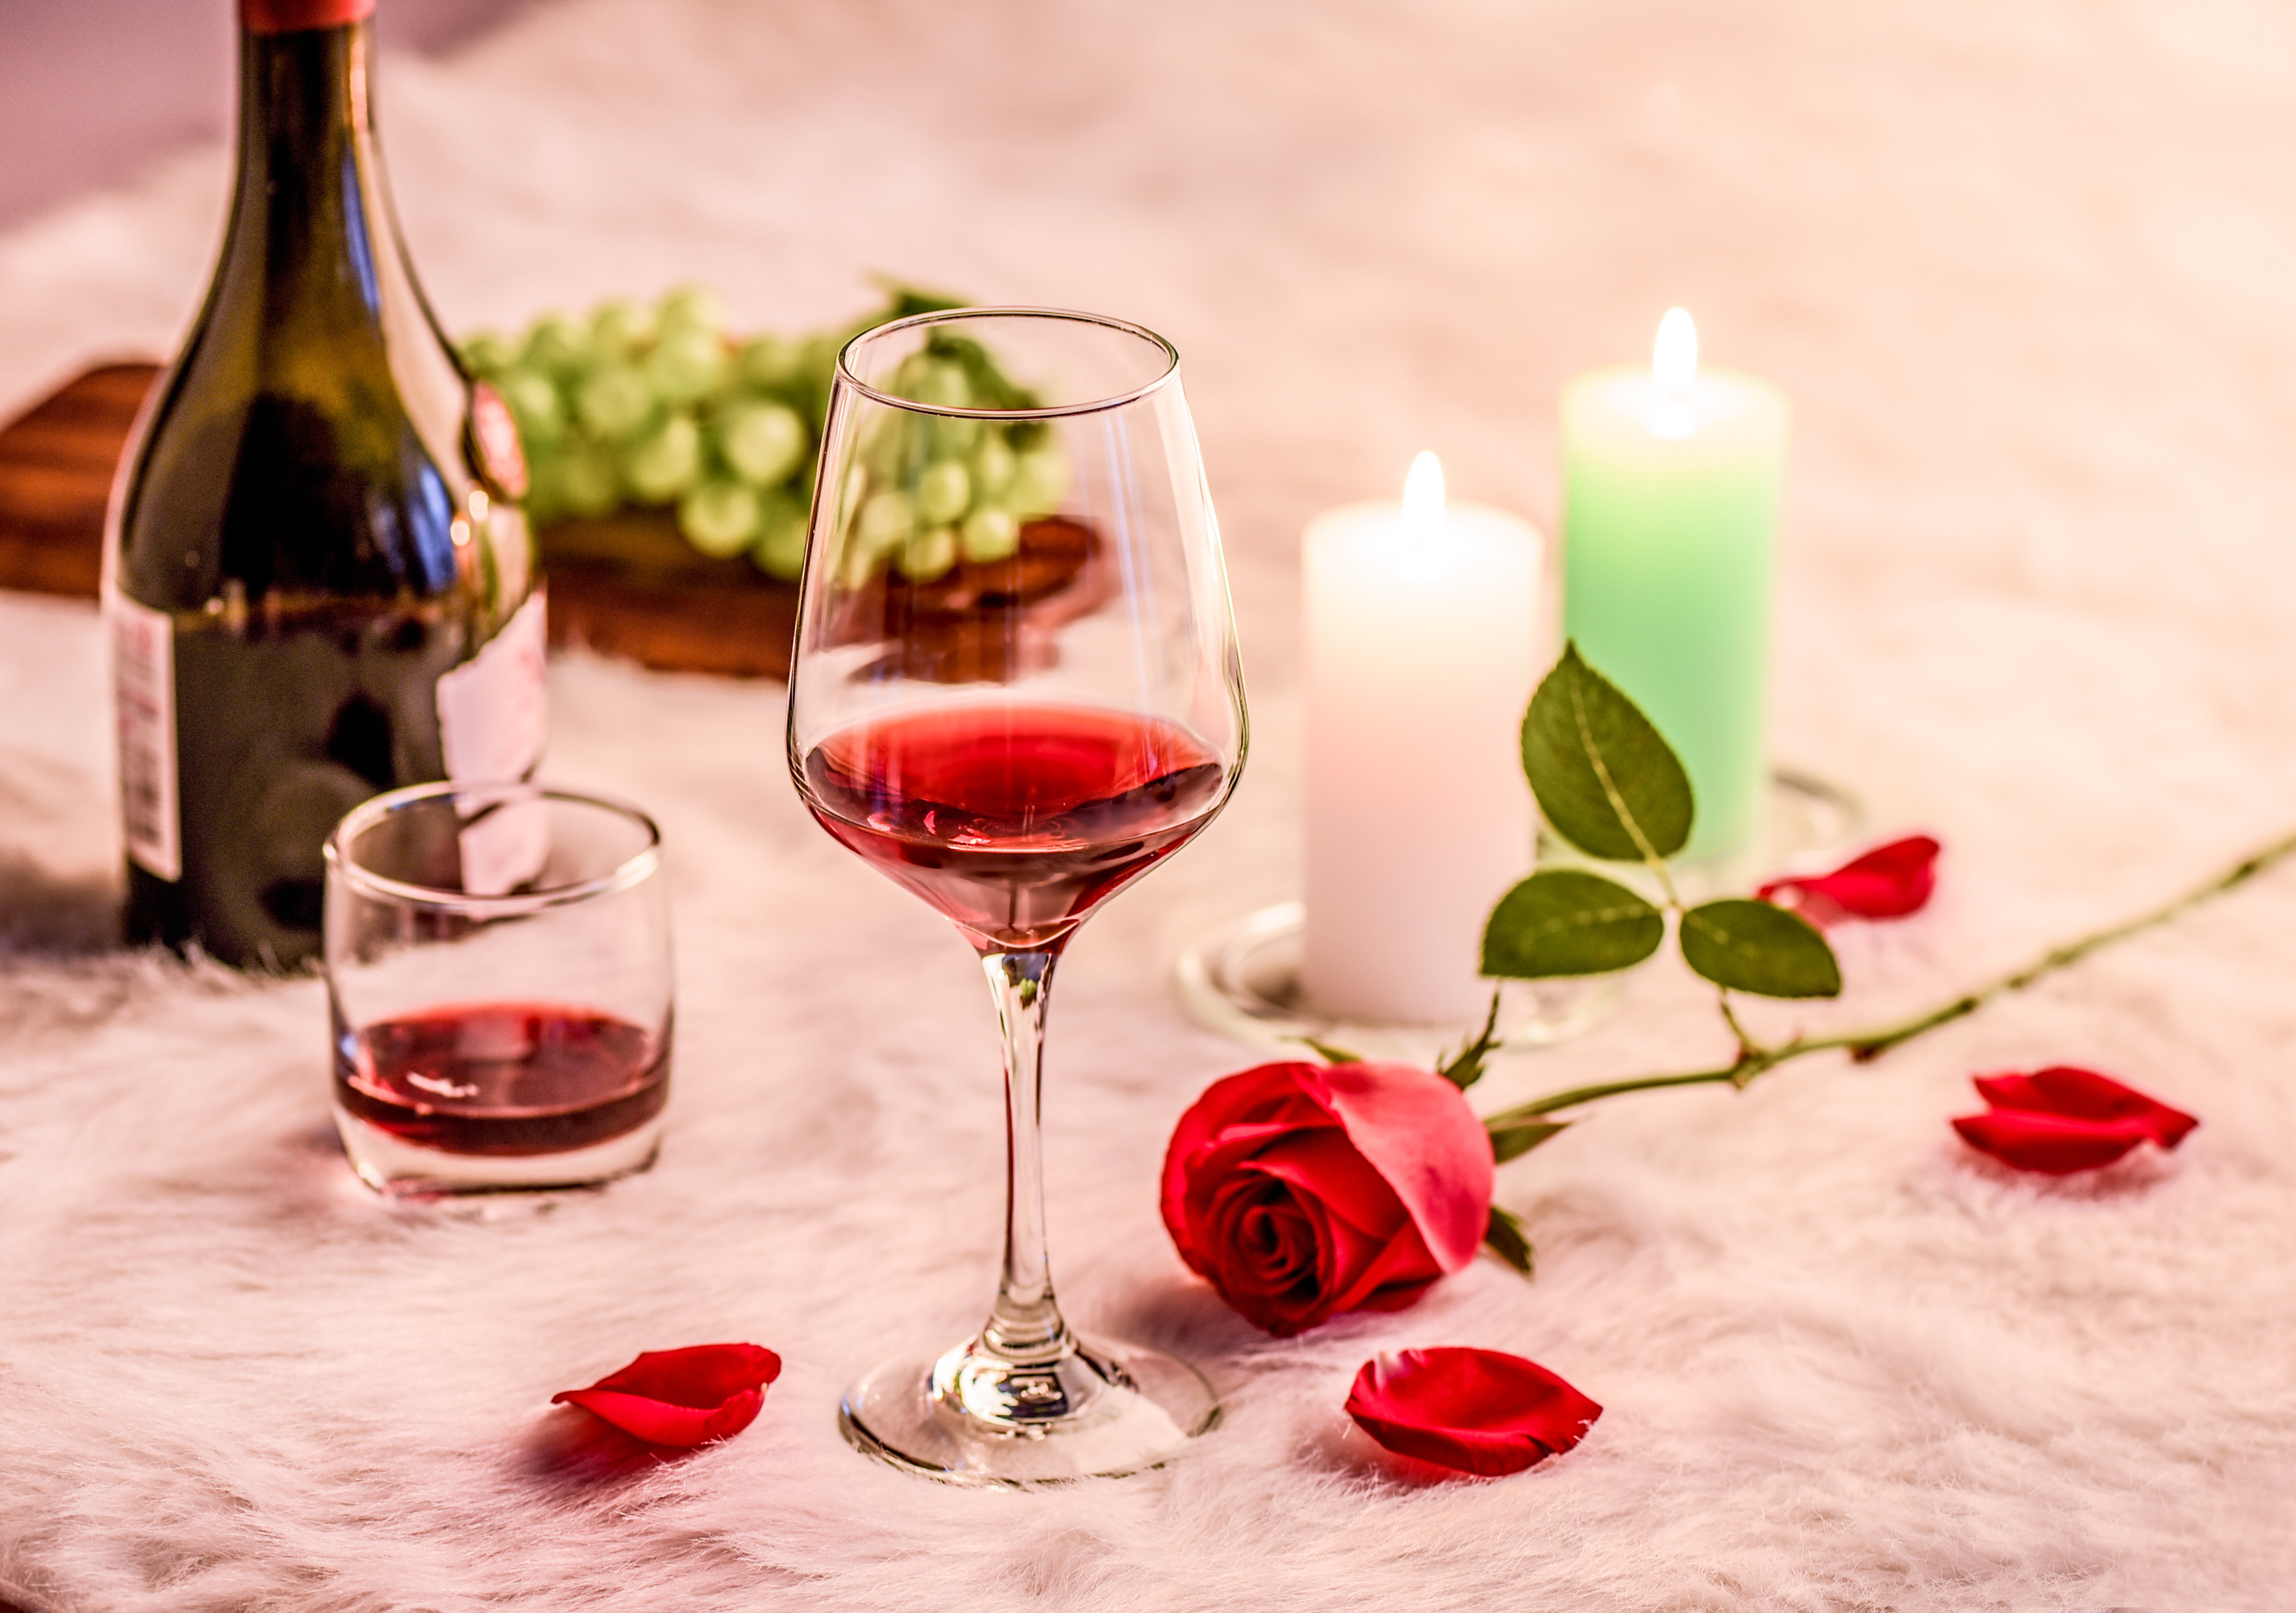 Rose Red Wine Glass Candles Pink 4916x3454